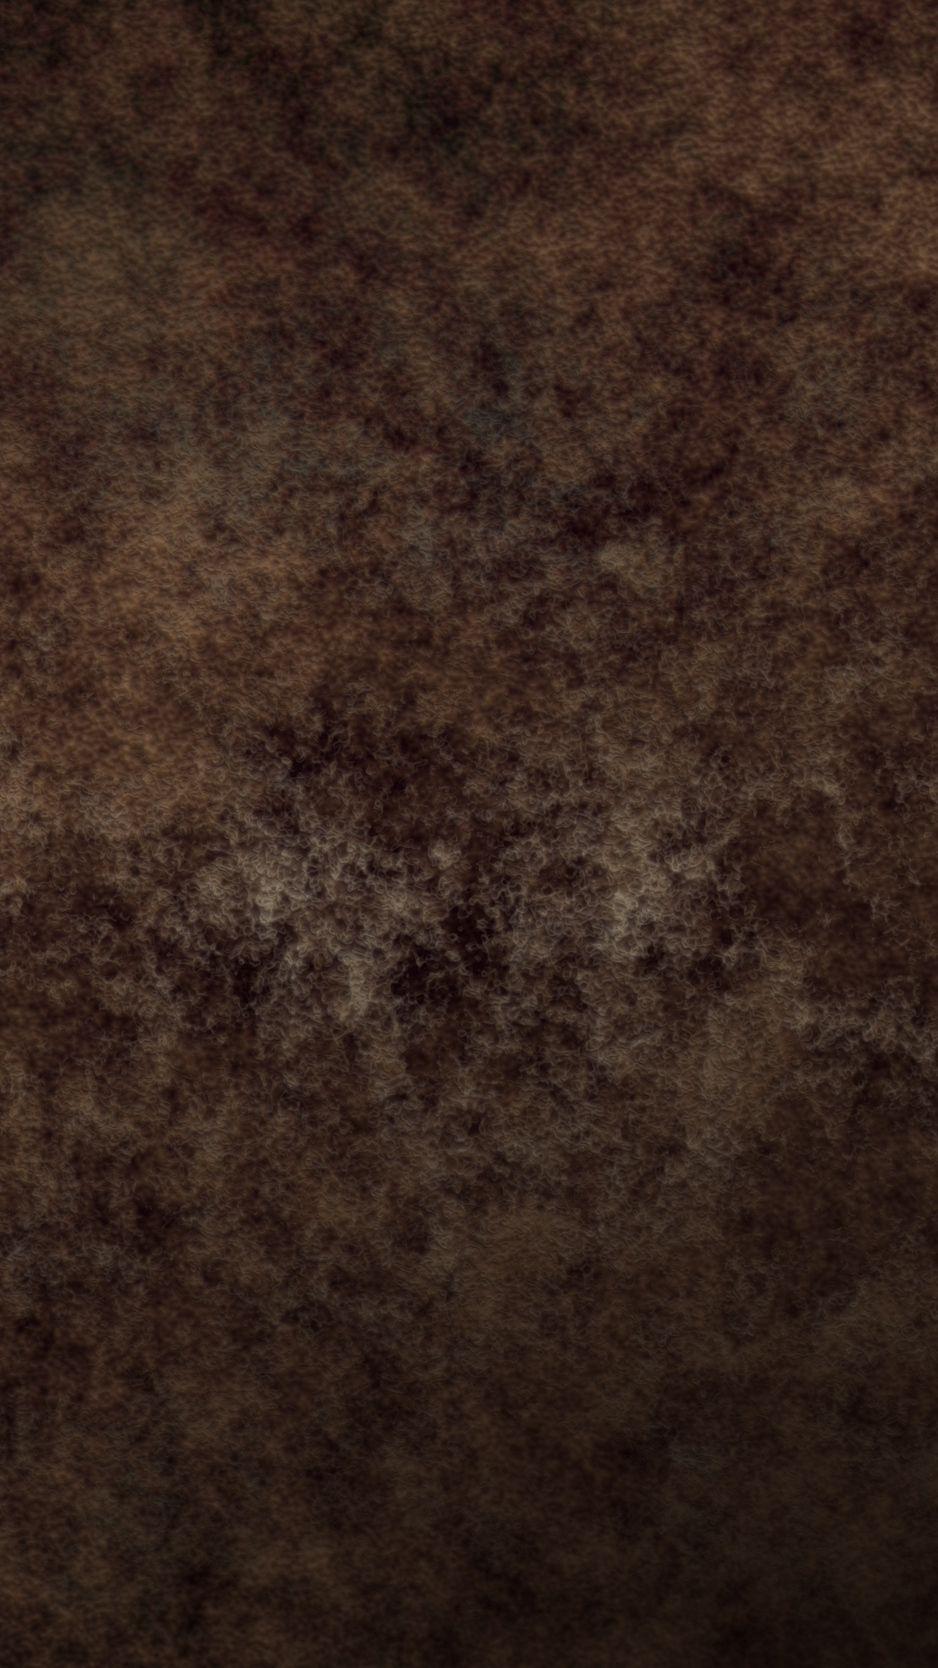 Brown Iphone Wallpapers Top Free Brown Iphone Backgrounds Wallpaperaccess